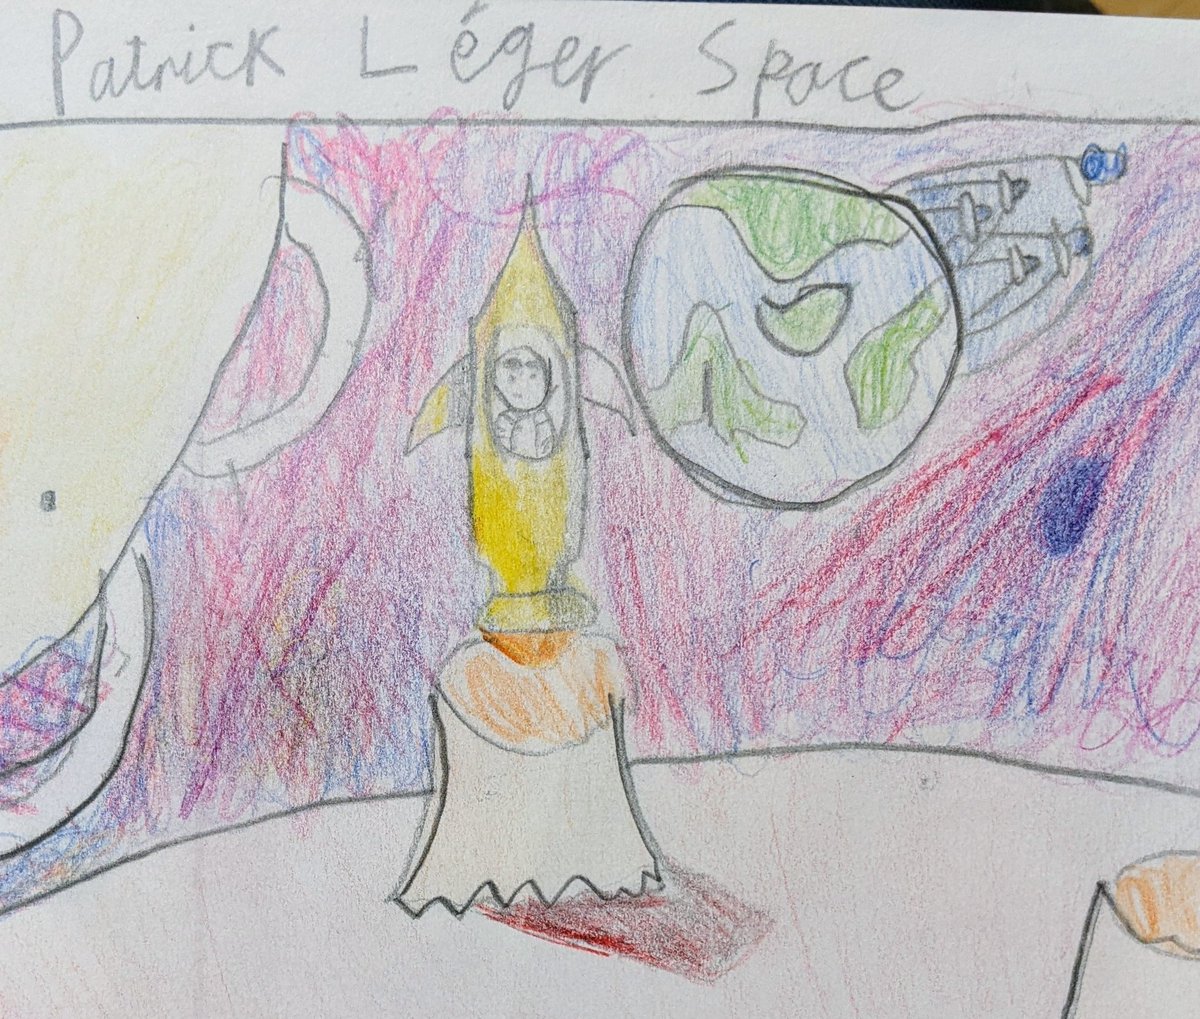 Here's my son's entry (Robert, Age 9) for #KidsDrawRockets22 part inspired by Patrick Léger (@frenchprinter)